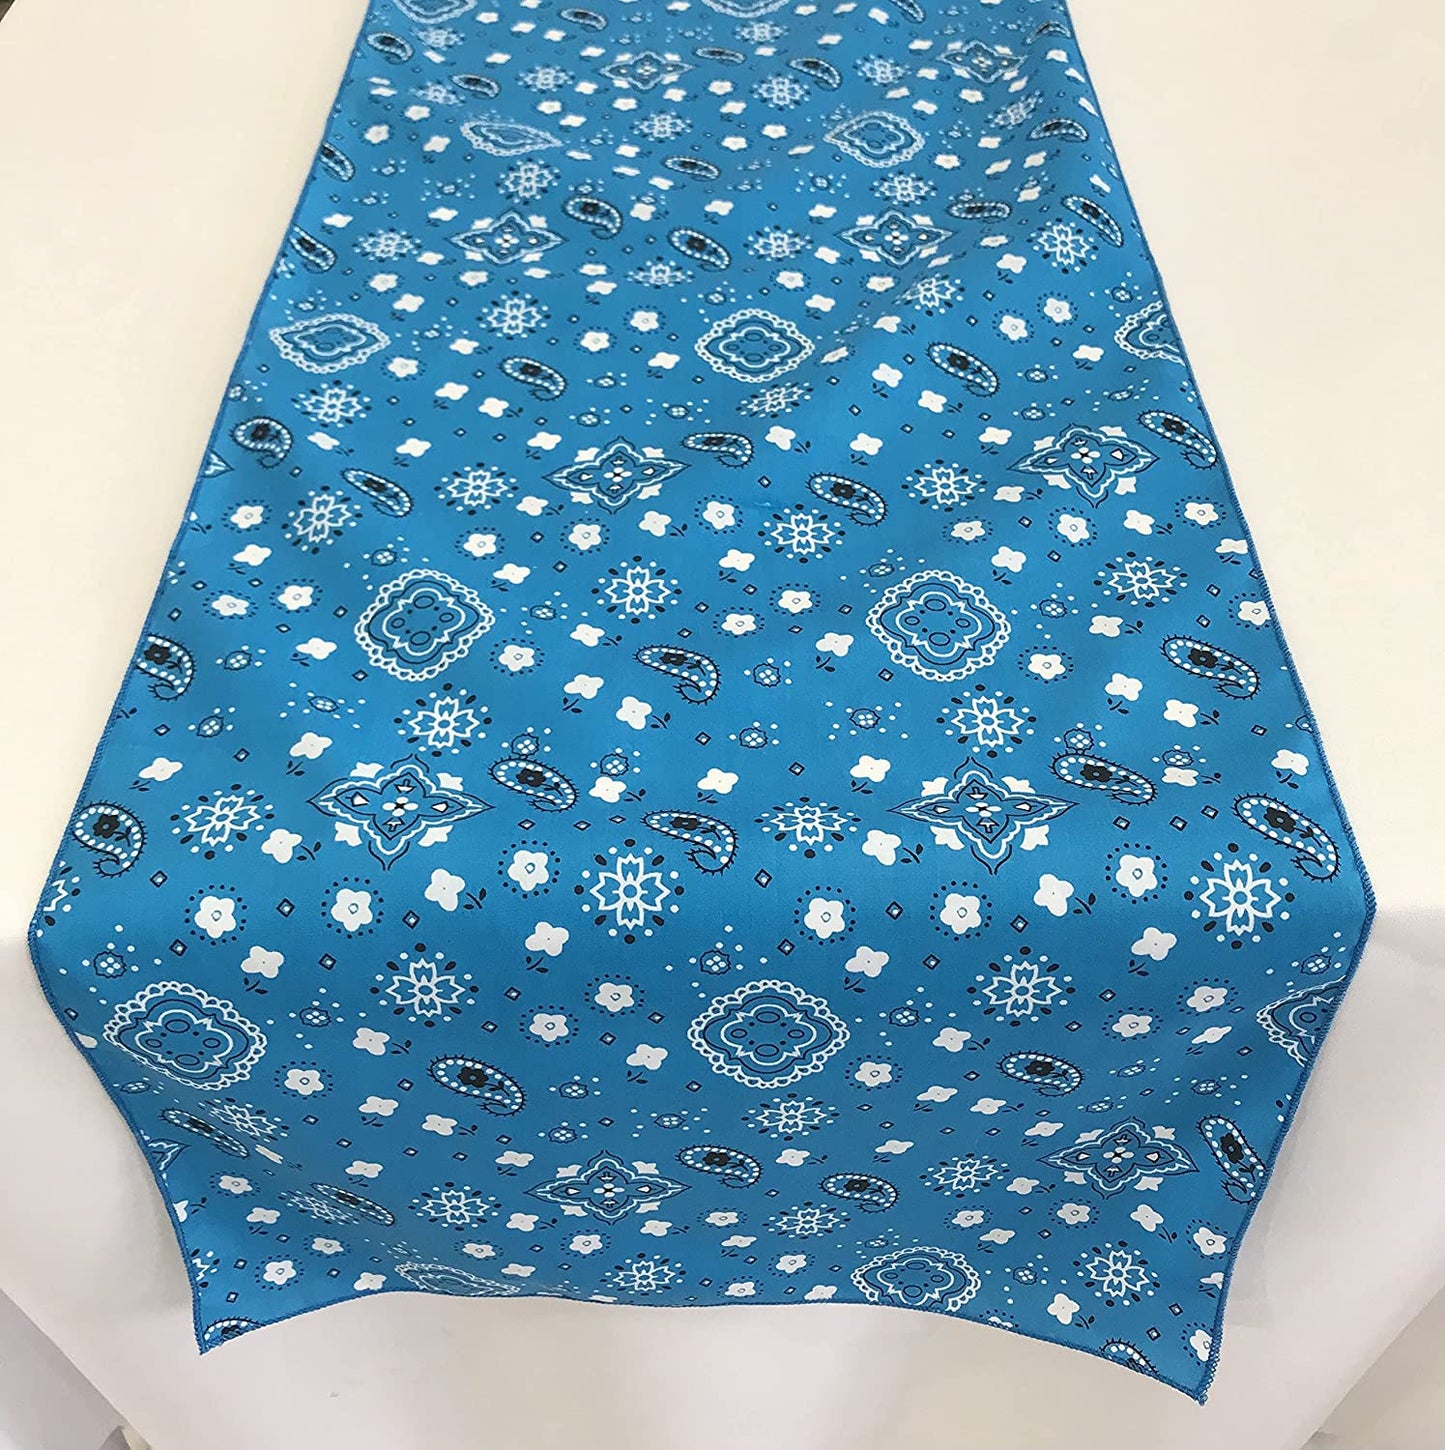 Bandanna Print Poly Cotton Table Runner (Turquoise,